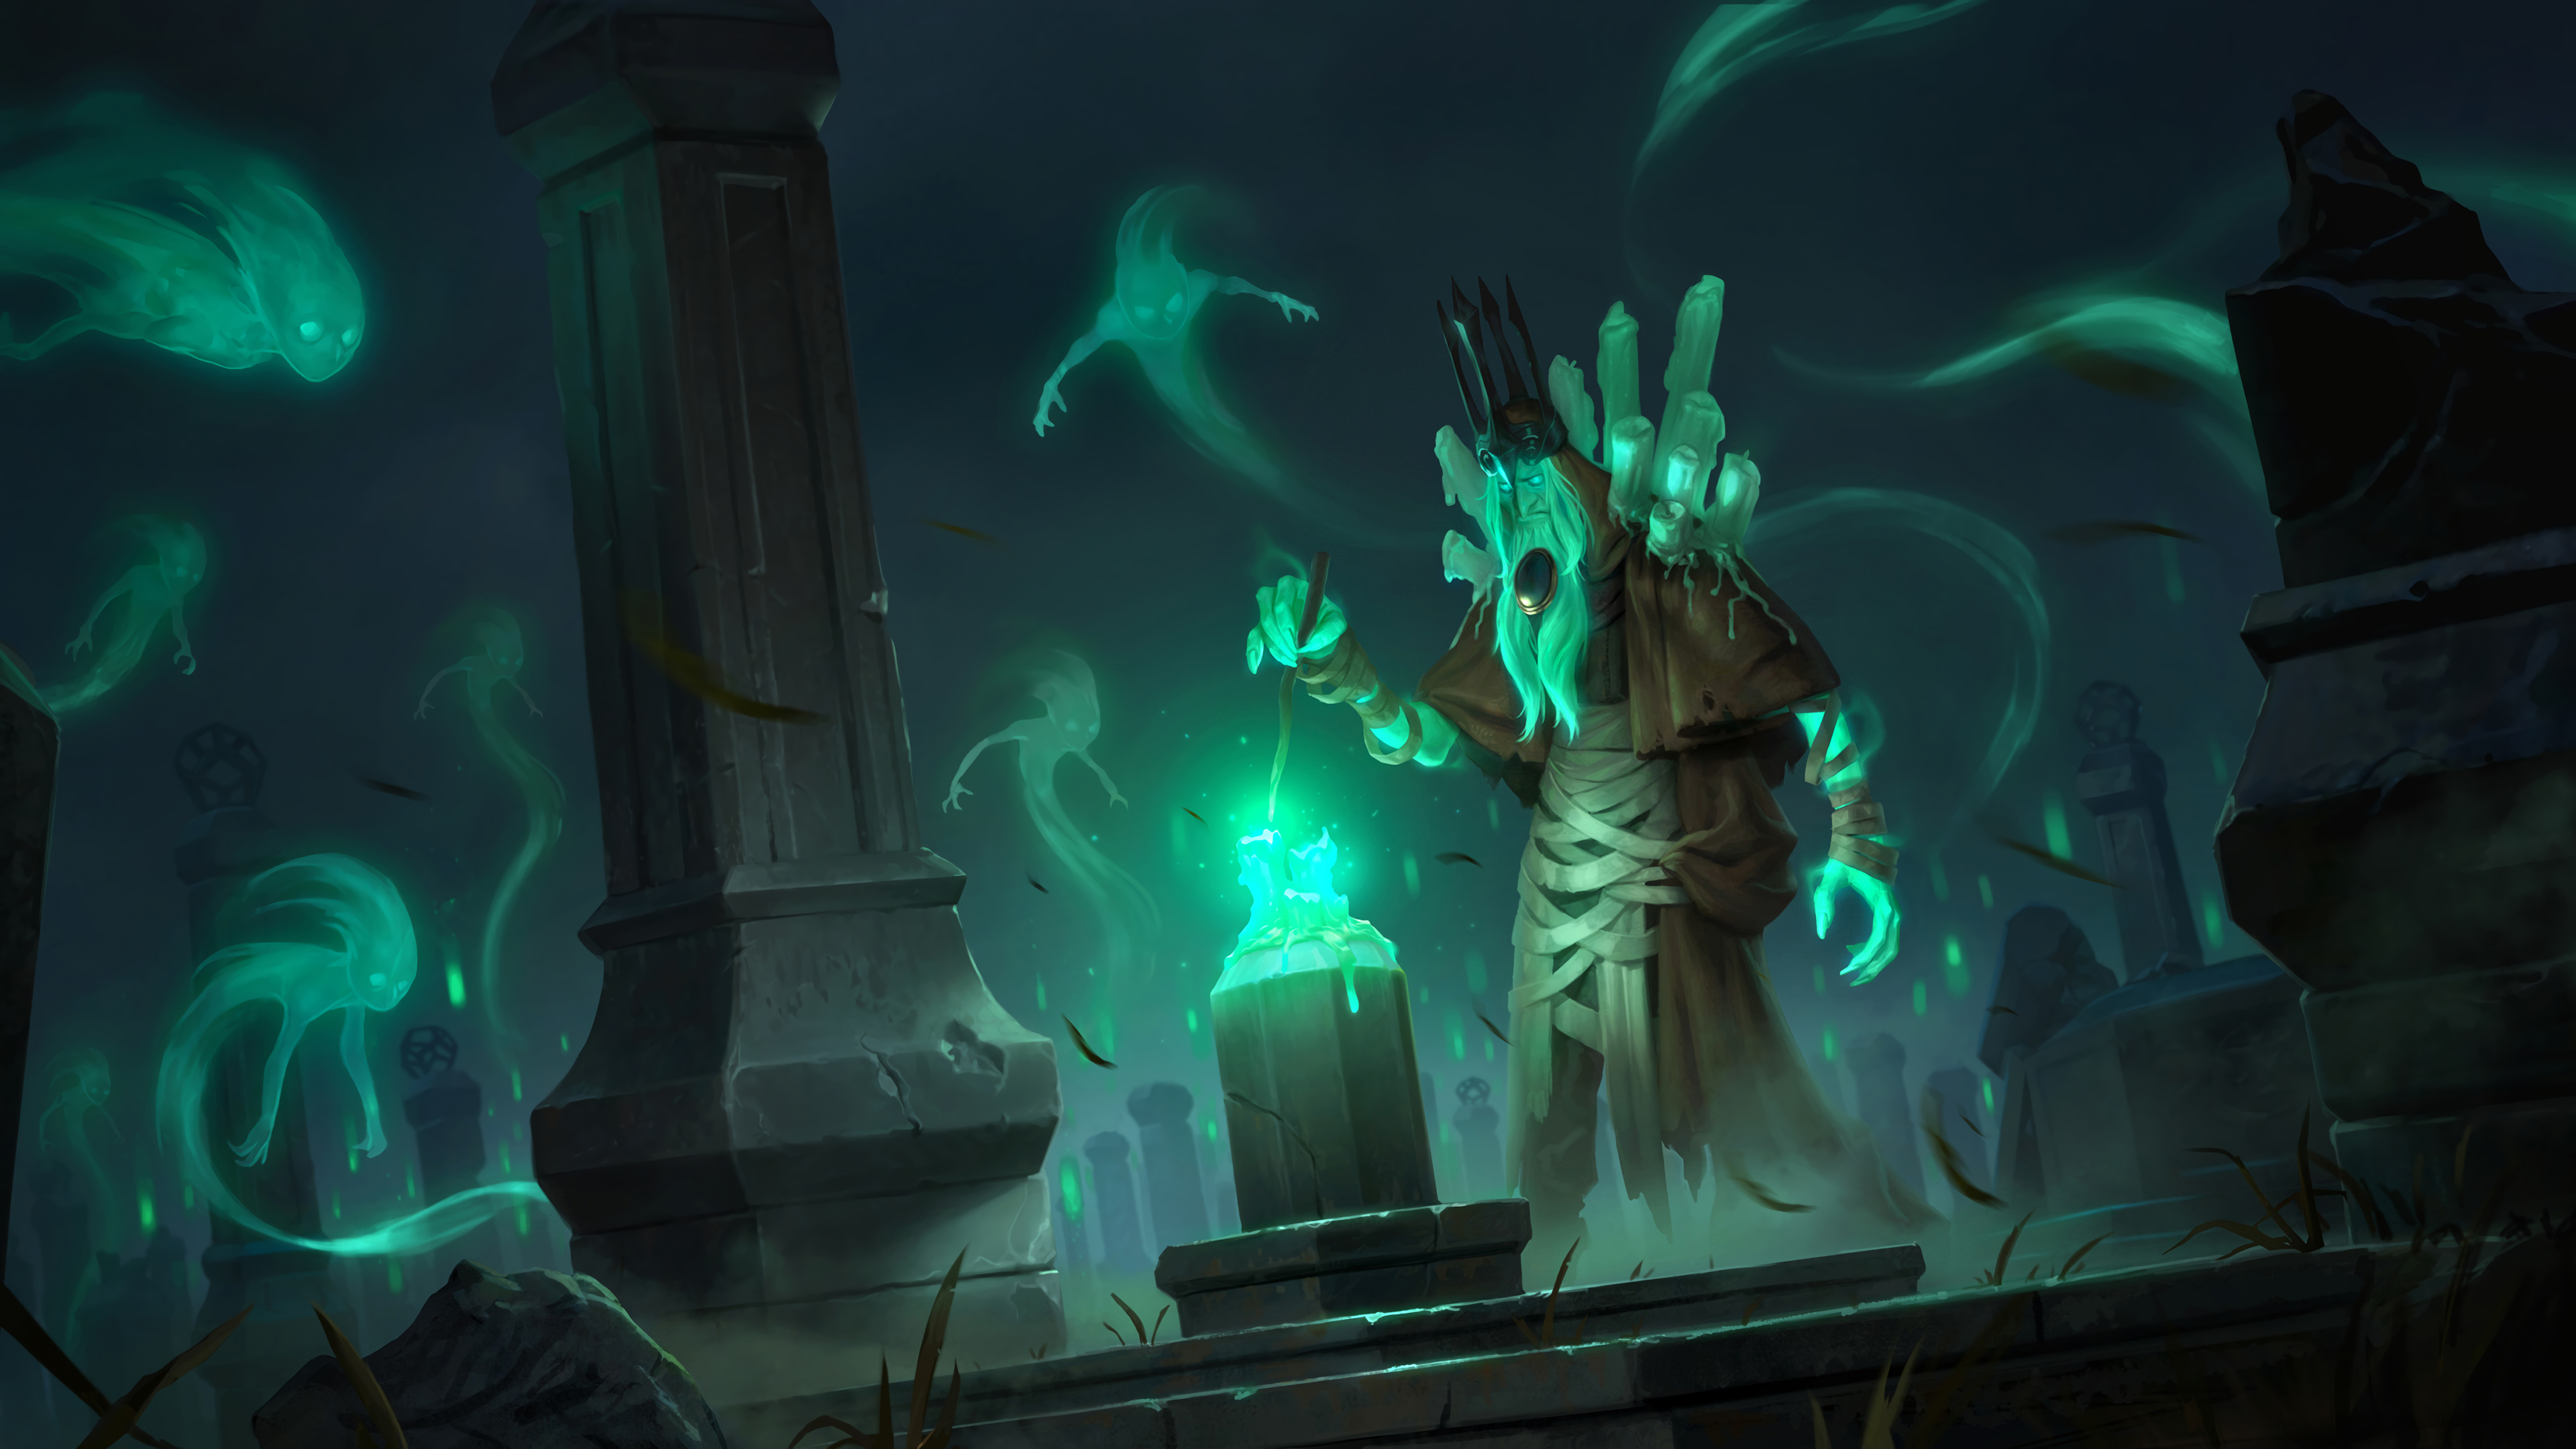 General 3840x2160 Legends of Runeterra League of Legends fantasy art PC gaming candles spirits robes Crypt (Location)